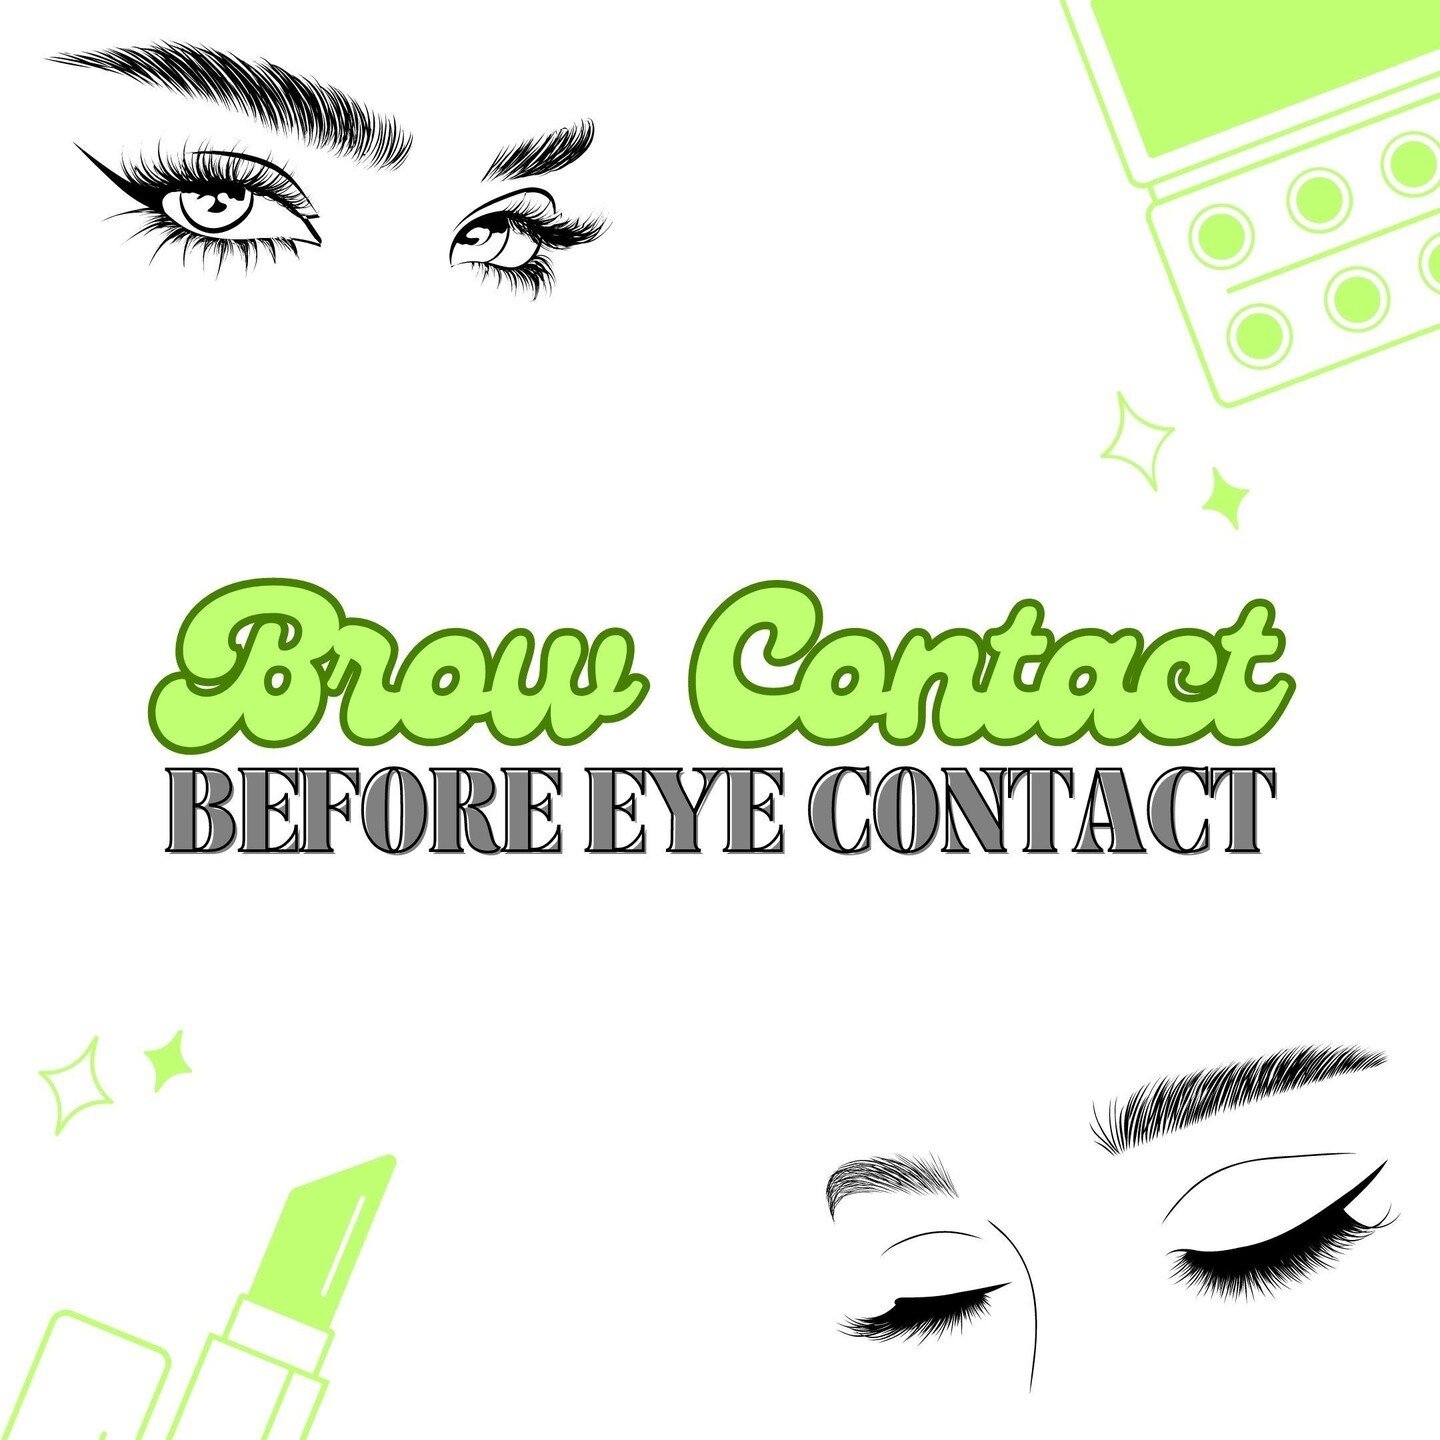 Does anyone else make brow contact before eye contact? 😂 We do! Keep those brows on point with Studio21. Book your next appointment by clicking the link in bio!

#Studio21BeautyBar #BrowandBeauty